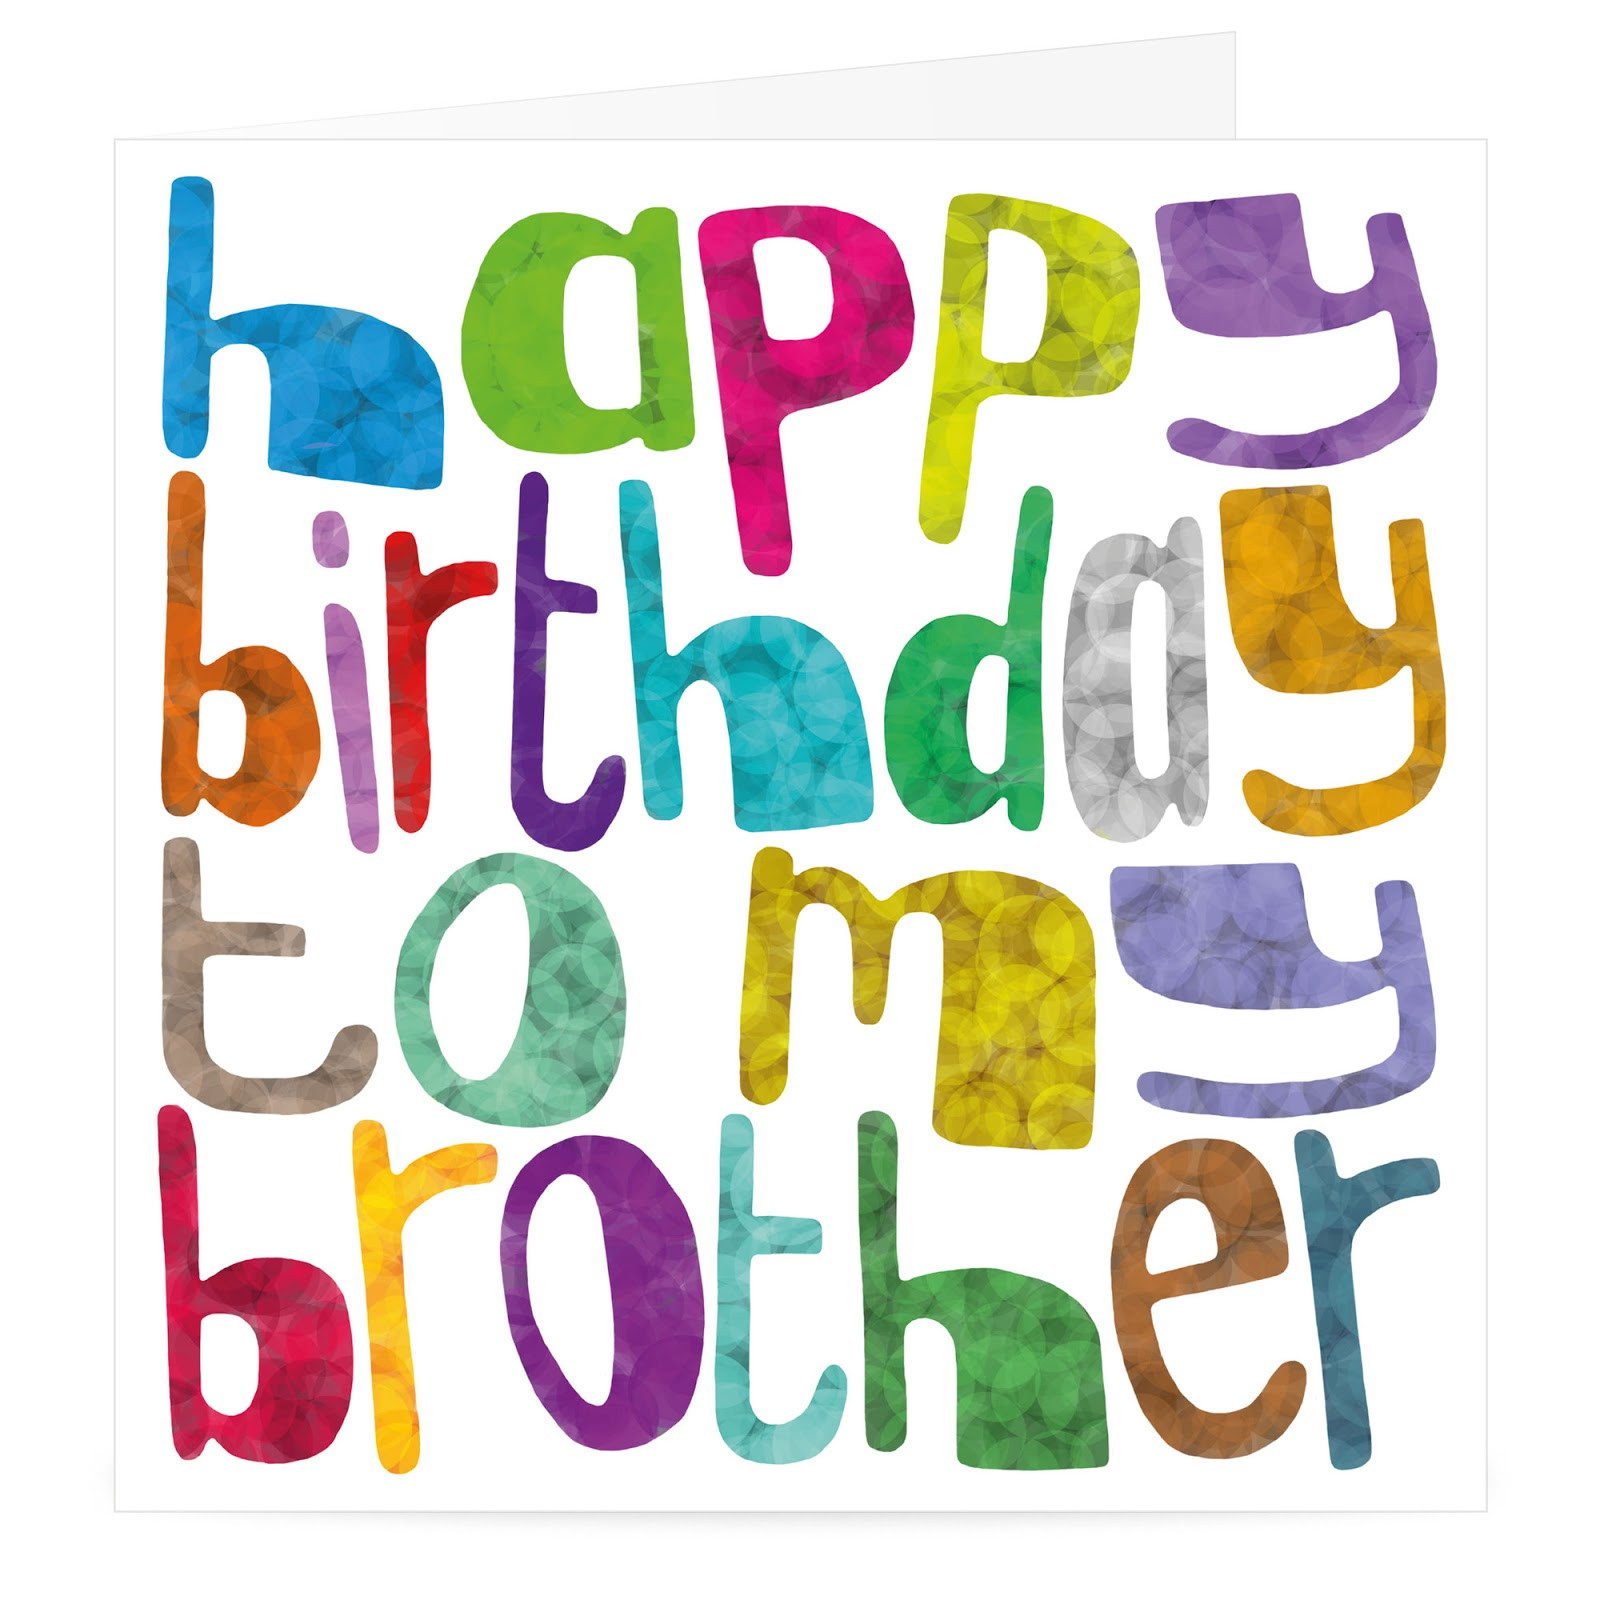 Birthday Wishes For My Brother
 HAPPY BIRTHDAY BROTHER birthday for brother brother